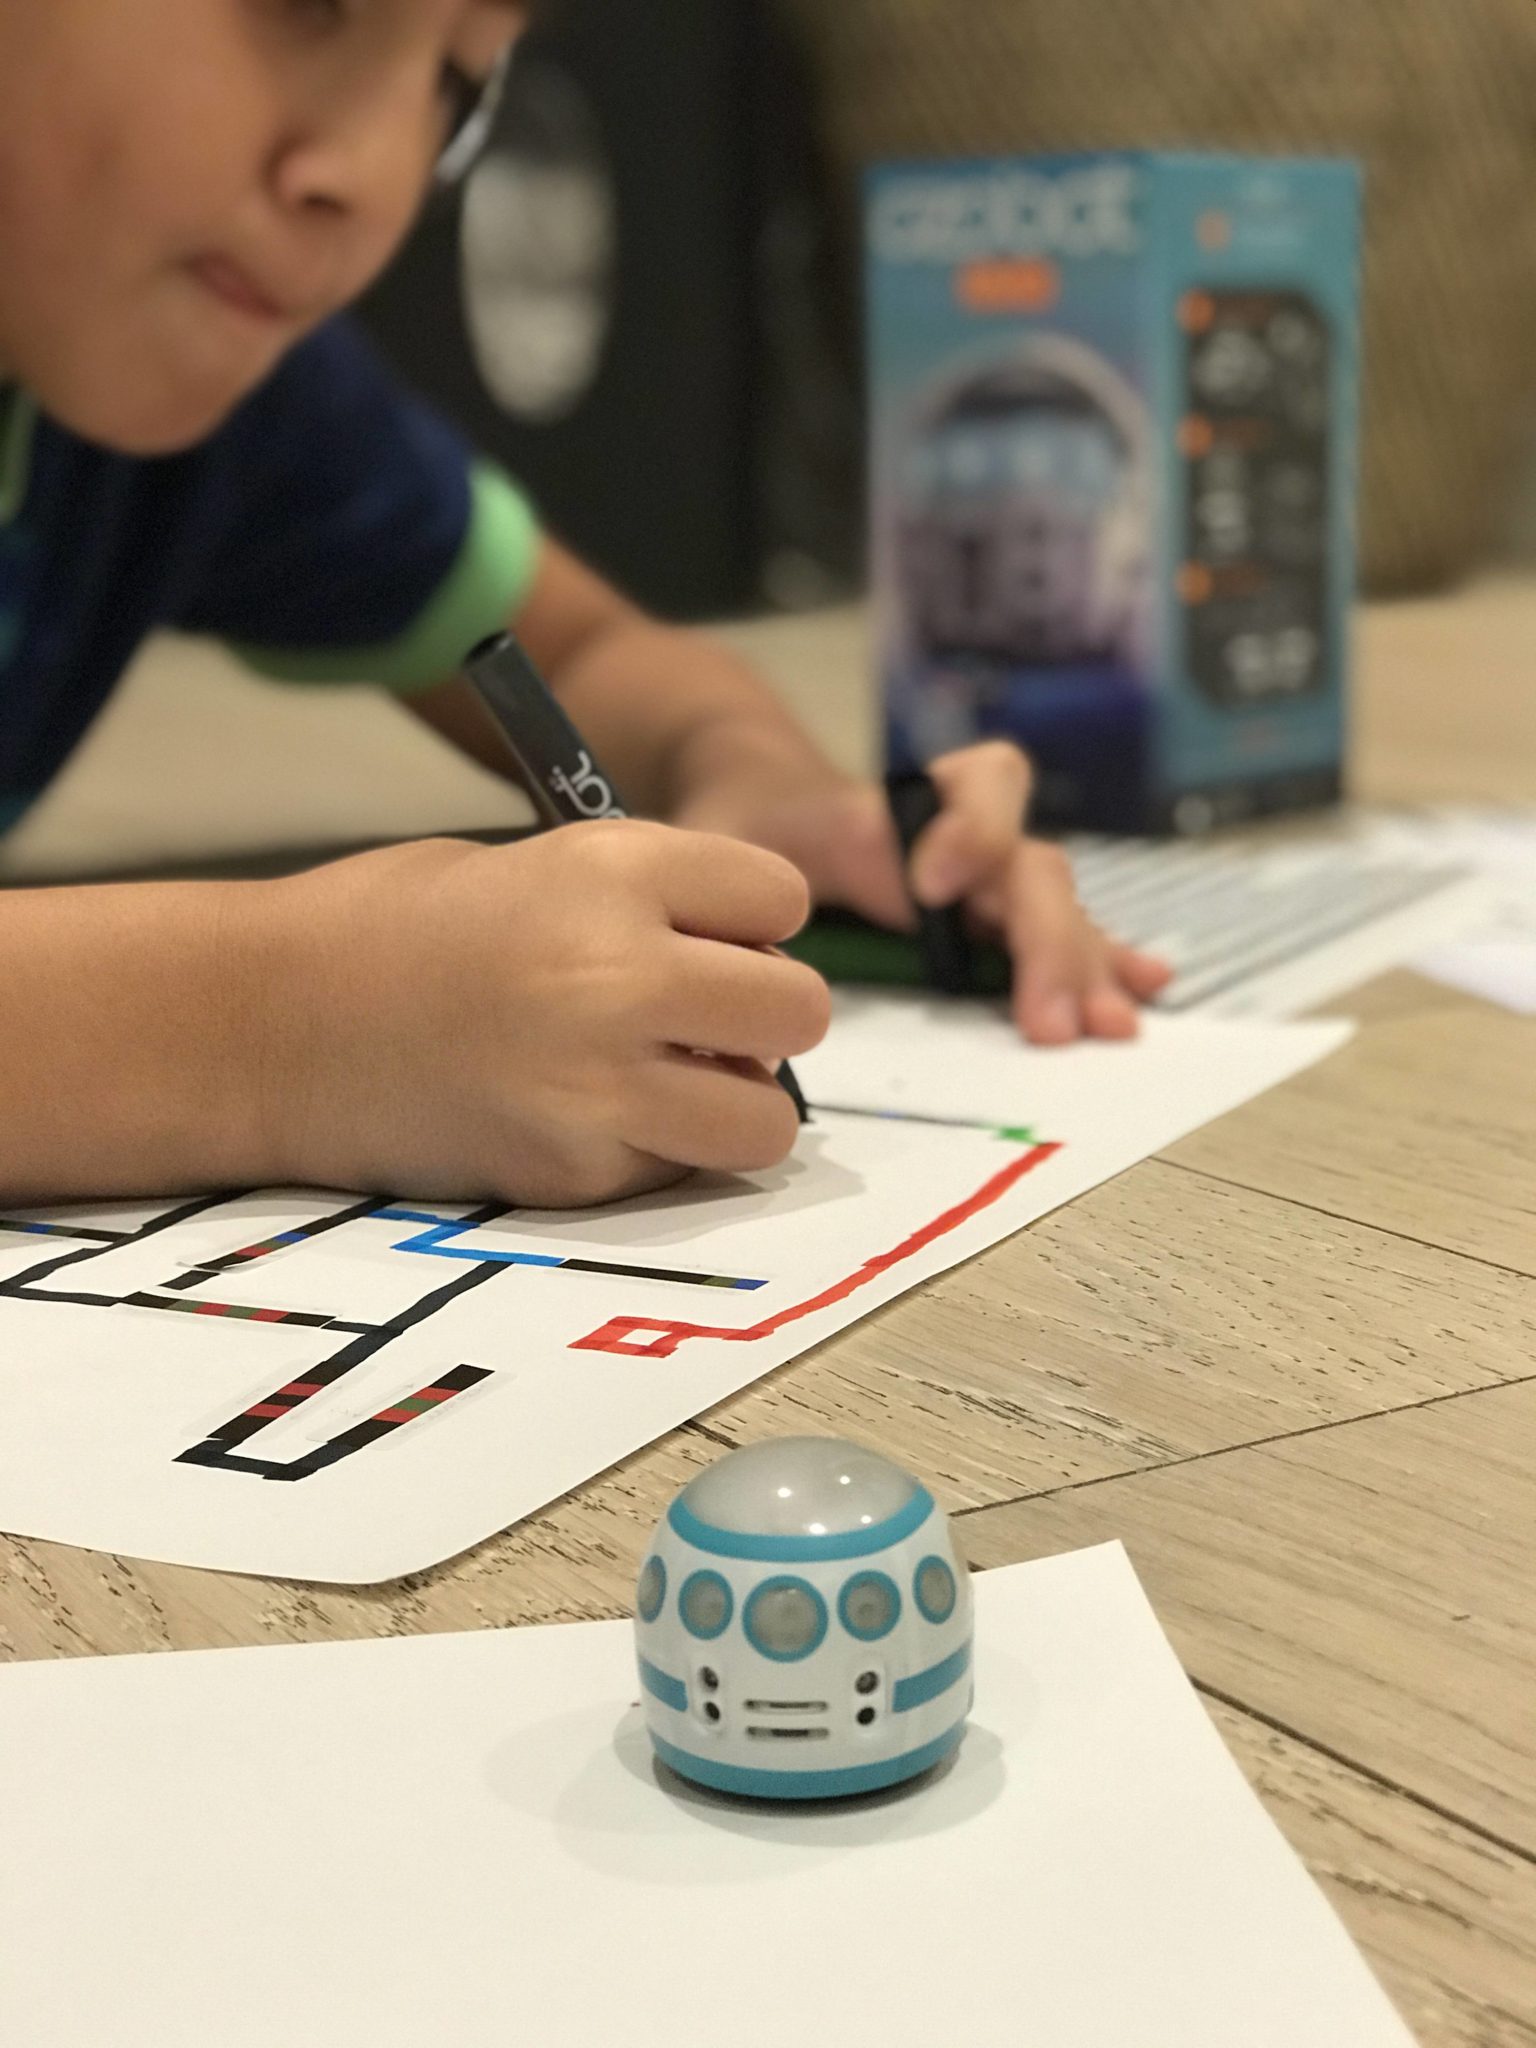 Coding Ozobot Evo - Cool New Toys Make This the Best Year to Play - Toy Fair 2018 Recap #TFNY